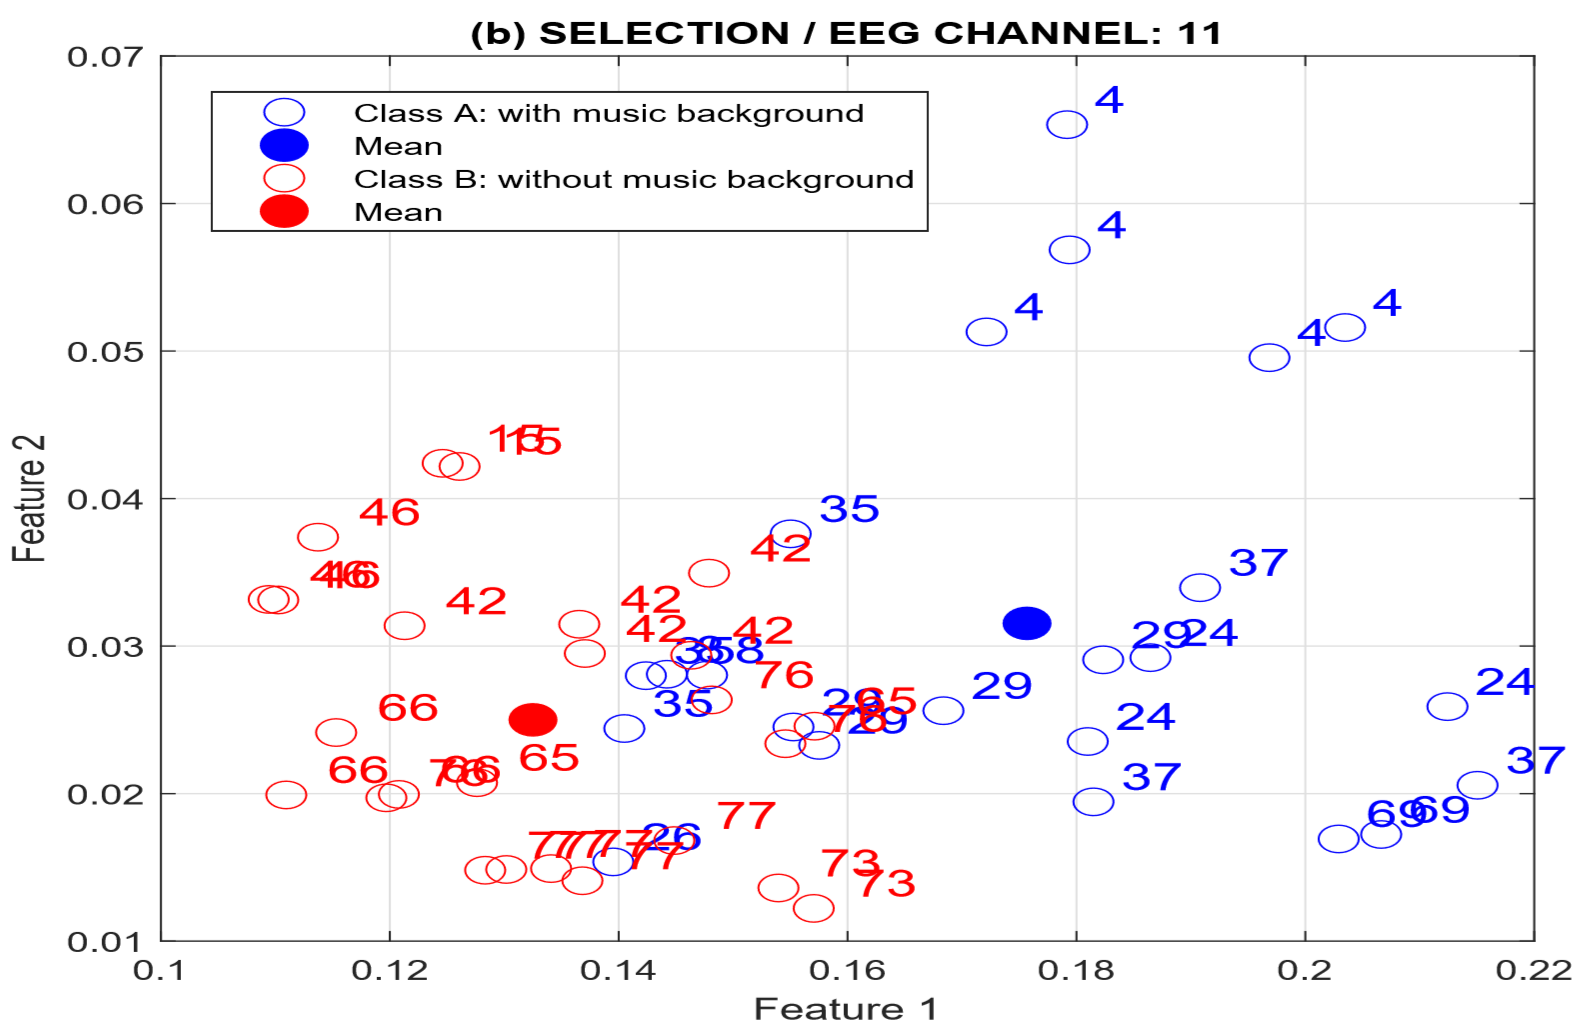 The location of features for the set of individuals with musical background (Class A) and without musical background (Class B) for EEG channel 11